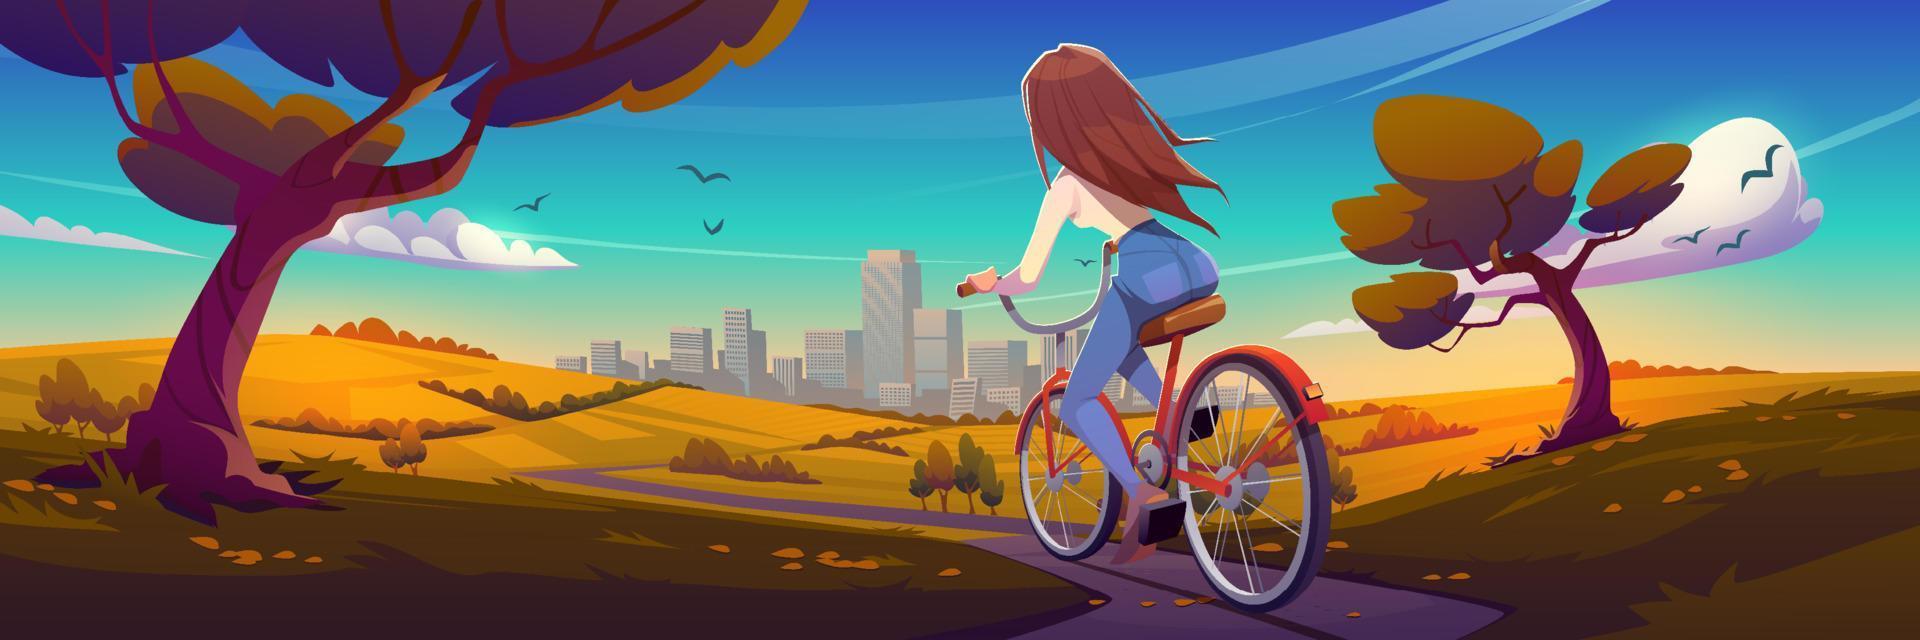 Girl rides on bike on road to city in fall vector